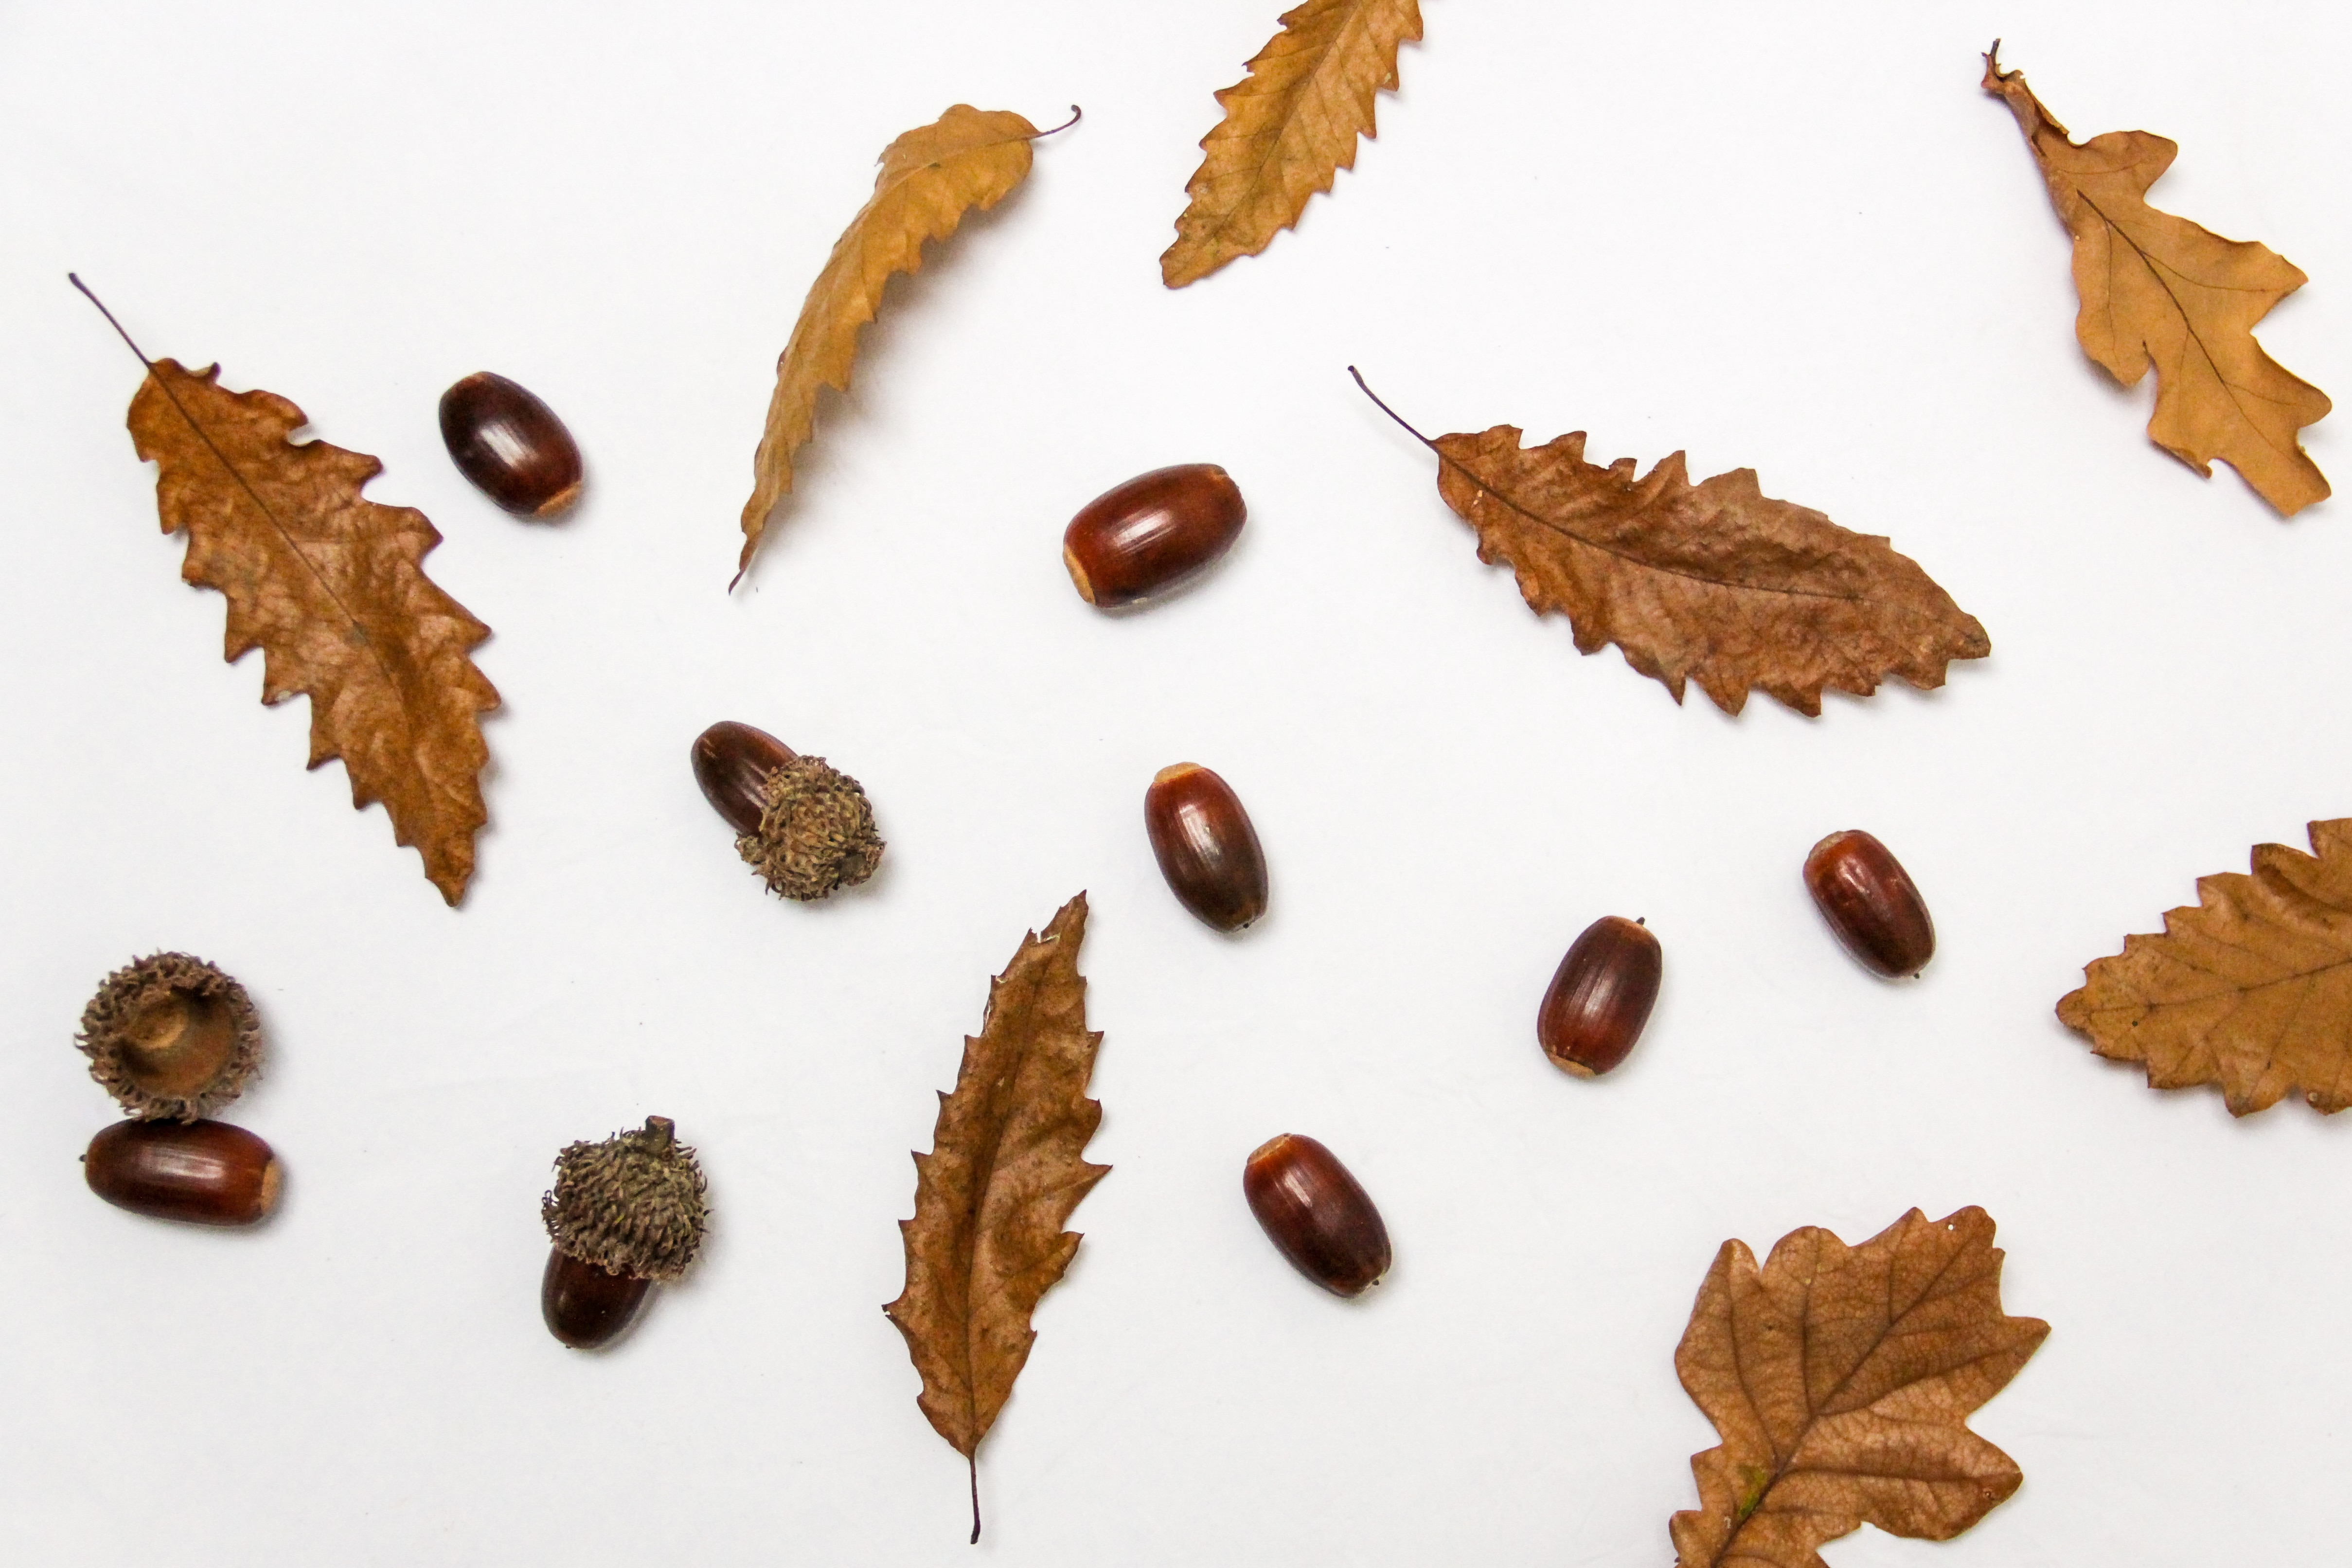 acorn lot and dried leaves on white surface